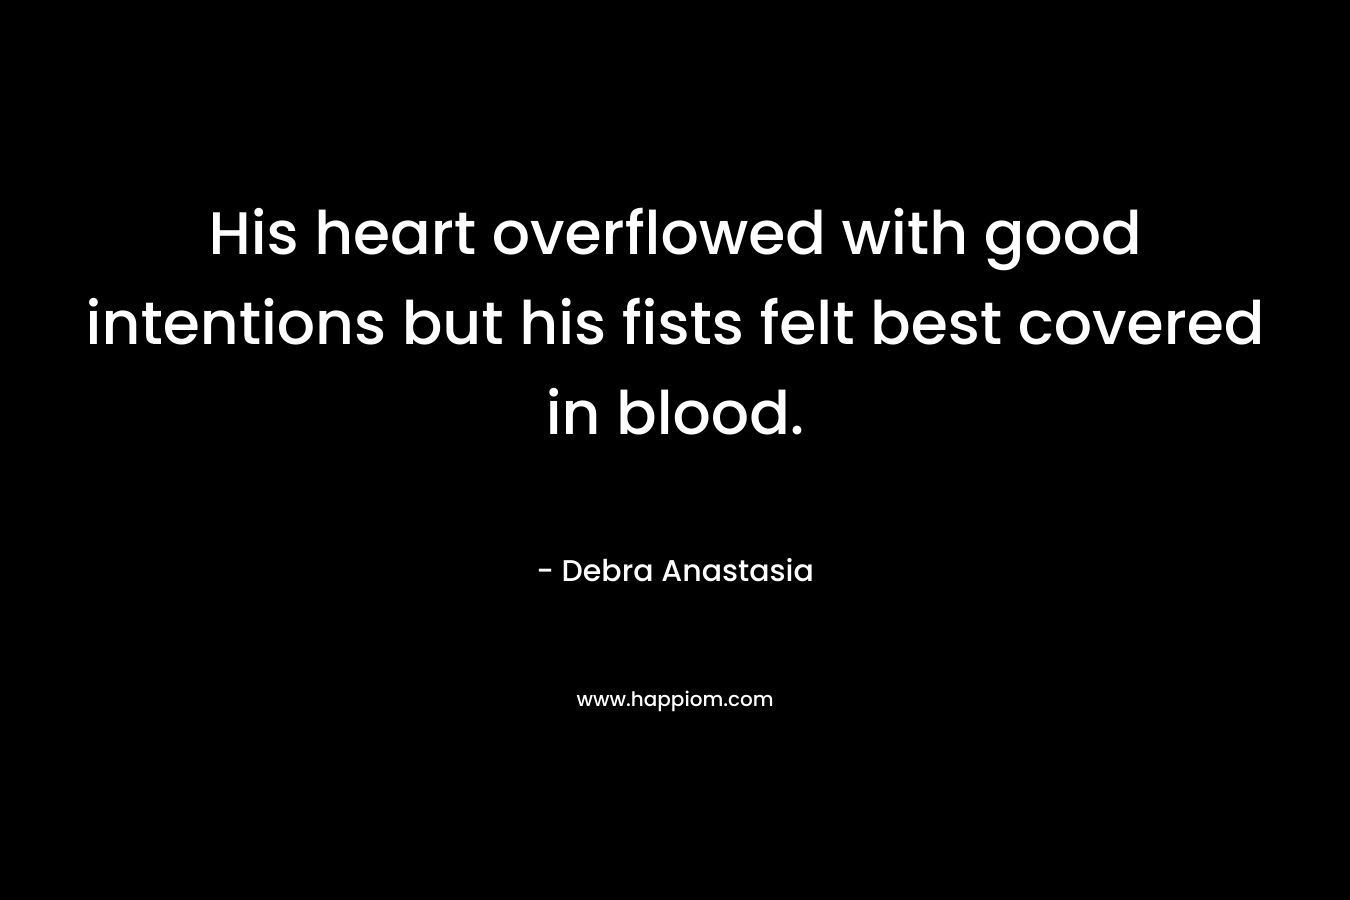 His heart overflowed with good intentions but his fists felt best covered in blood. – Debra Anastasia